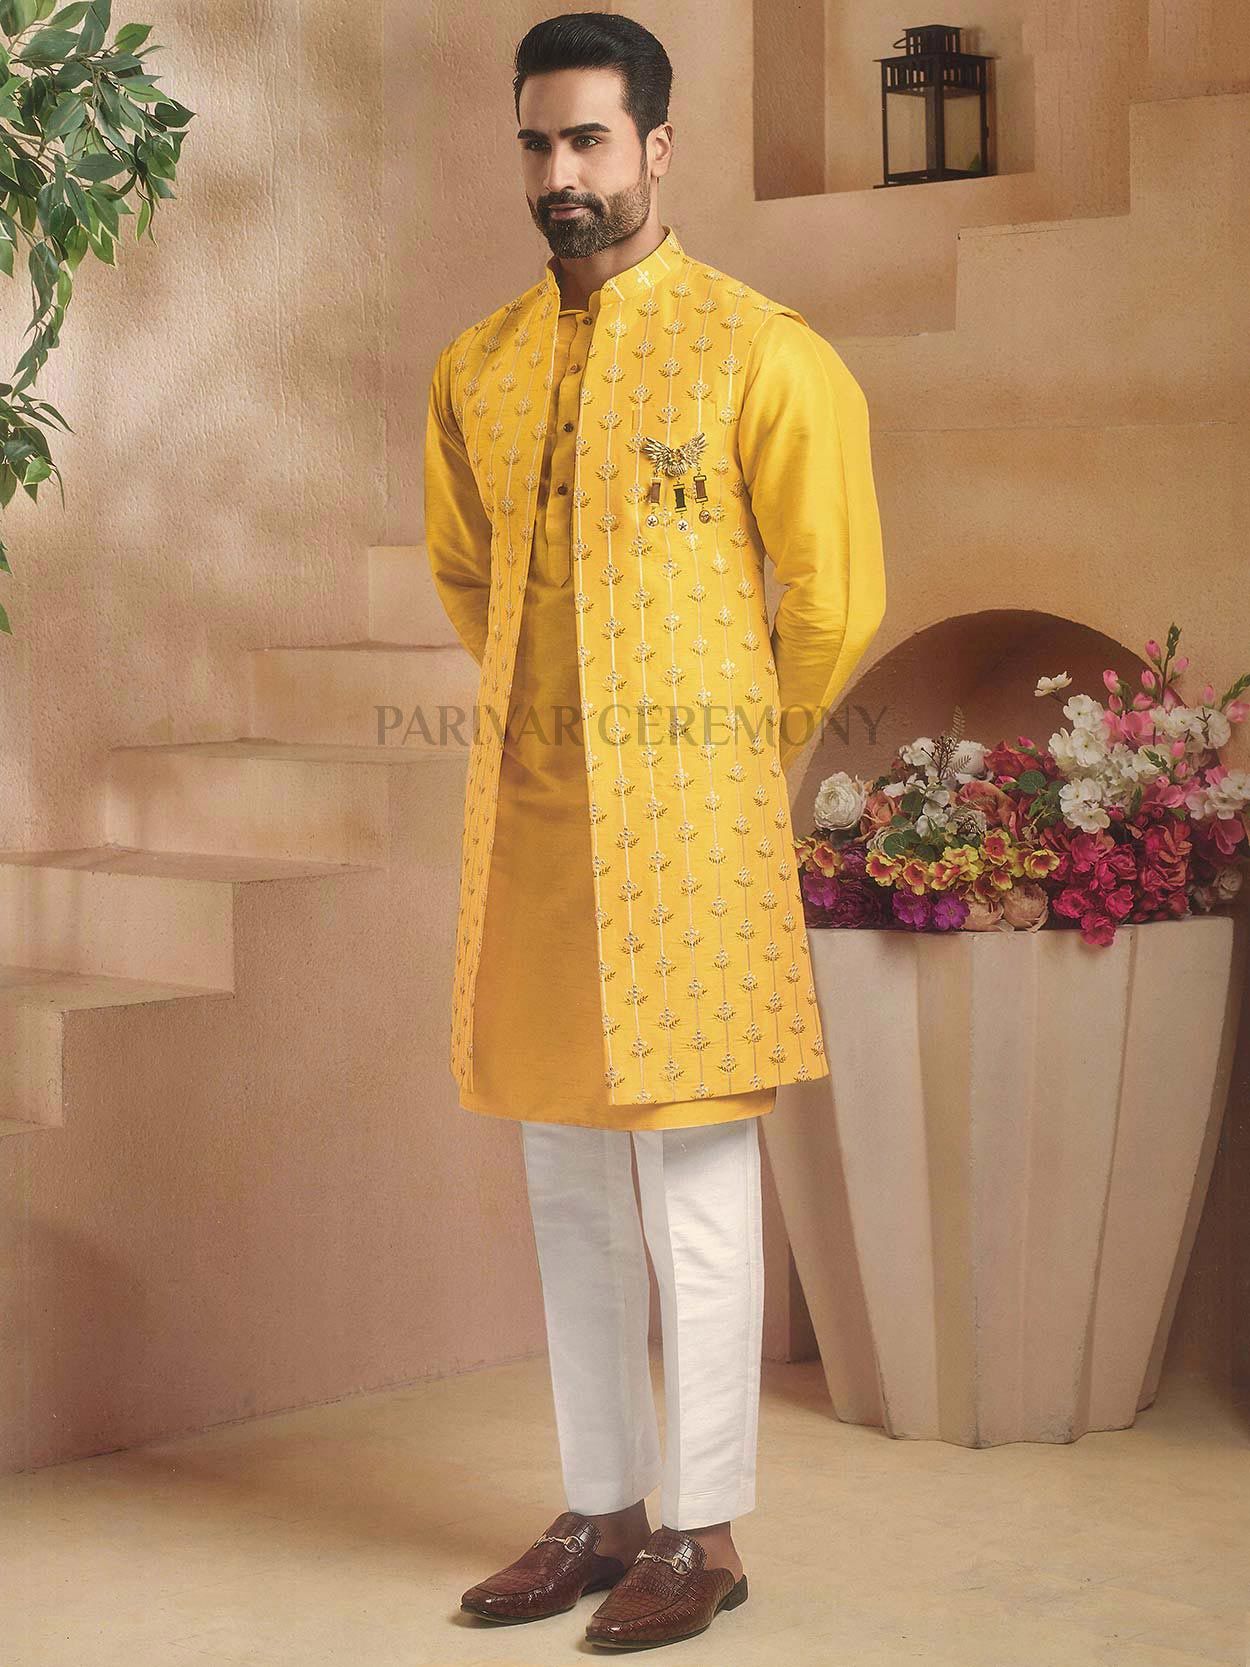 Rayon A Line Designer Sold Yellow Kurti with Border details at Rs 400 in  Bengaluru